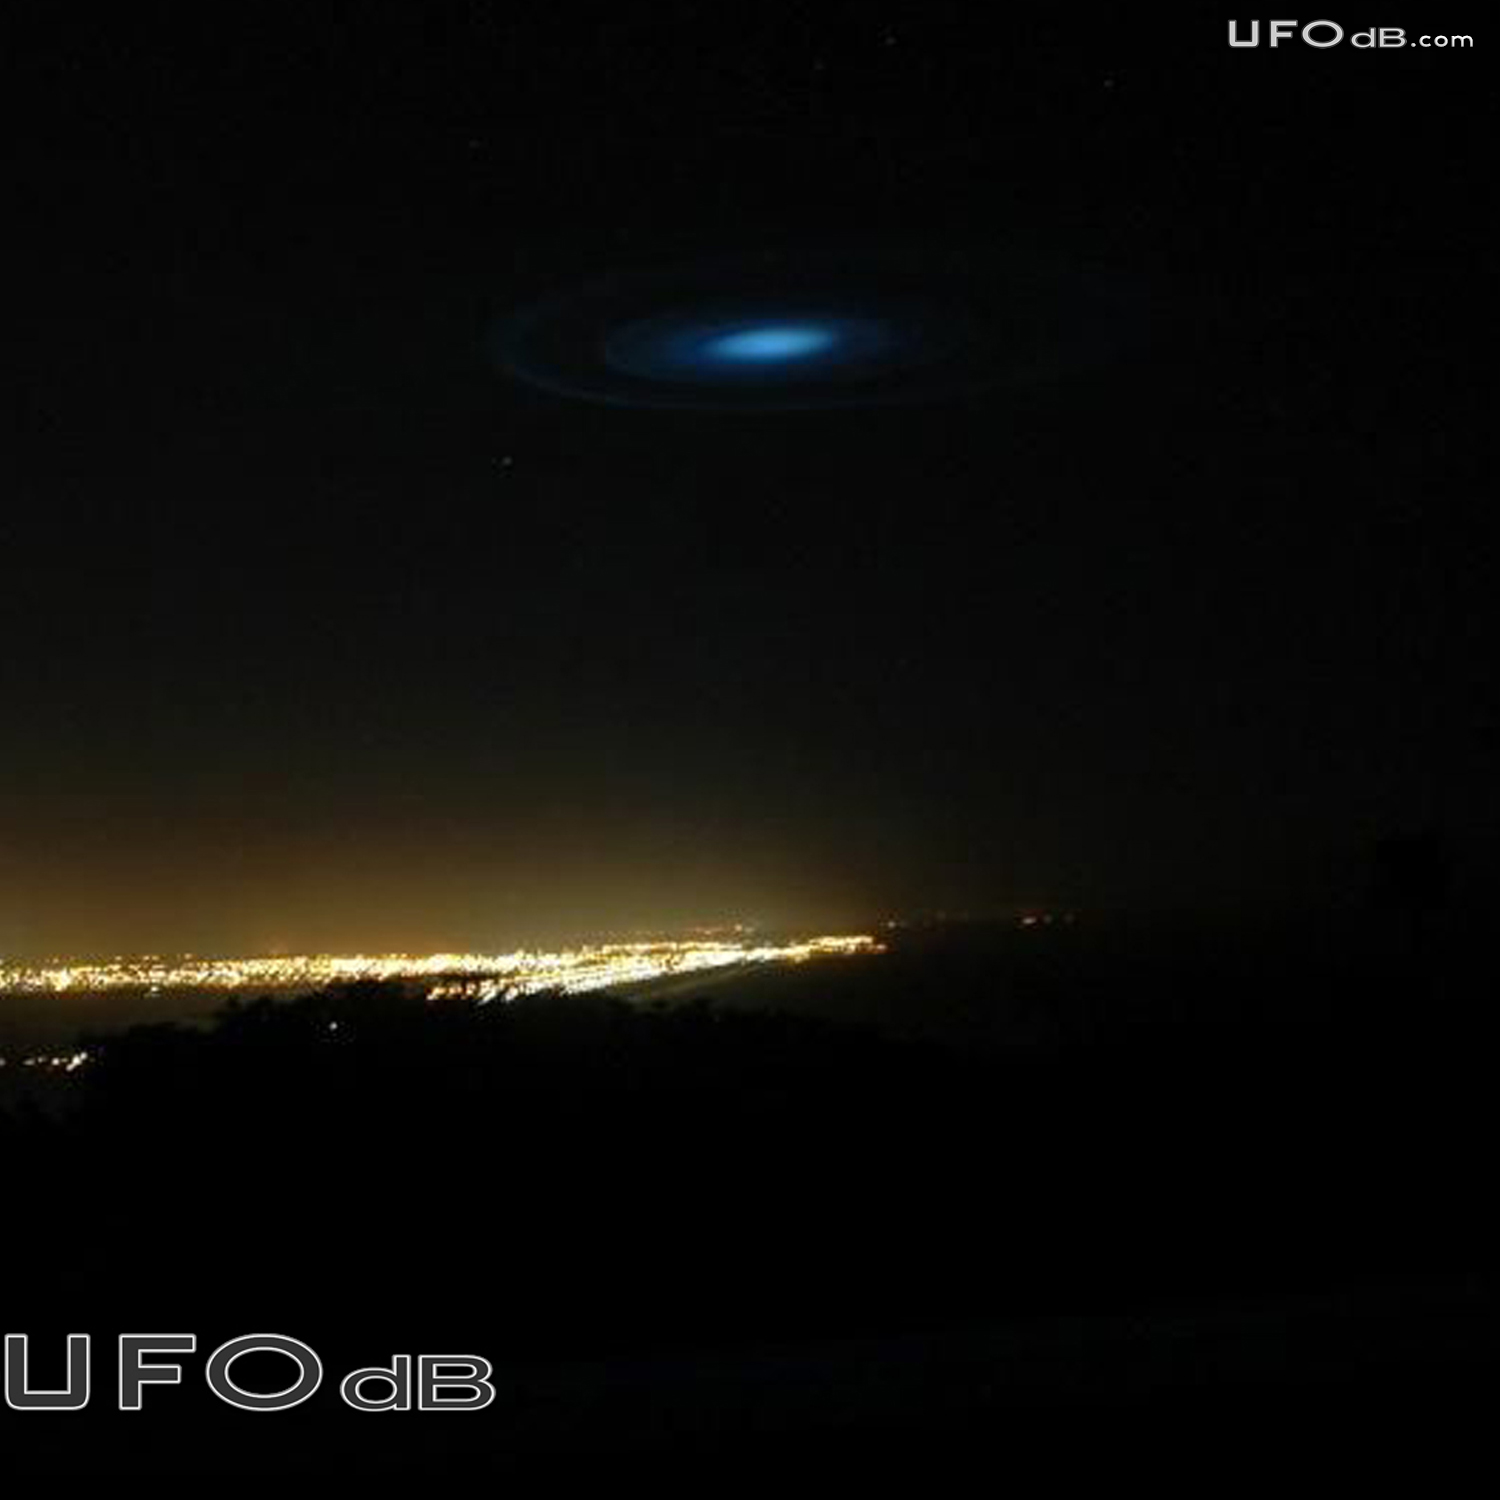 Christchurch New Zealand | Blue Glowing UFO on Picture | March 29 2011 UFO Picture #302-2